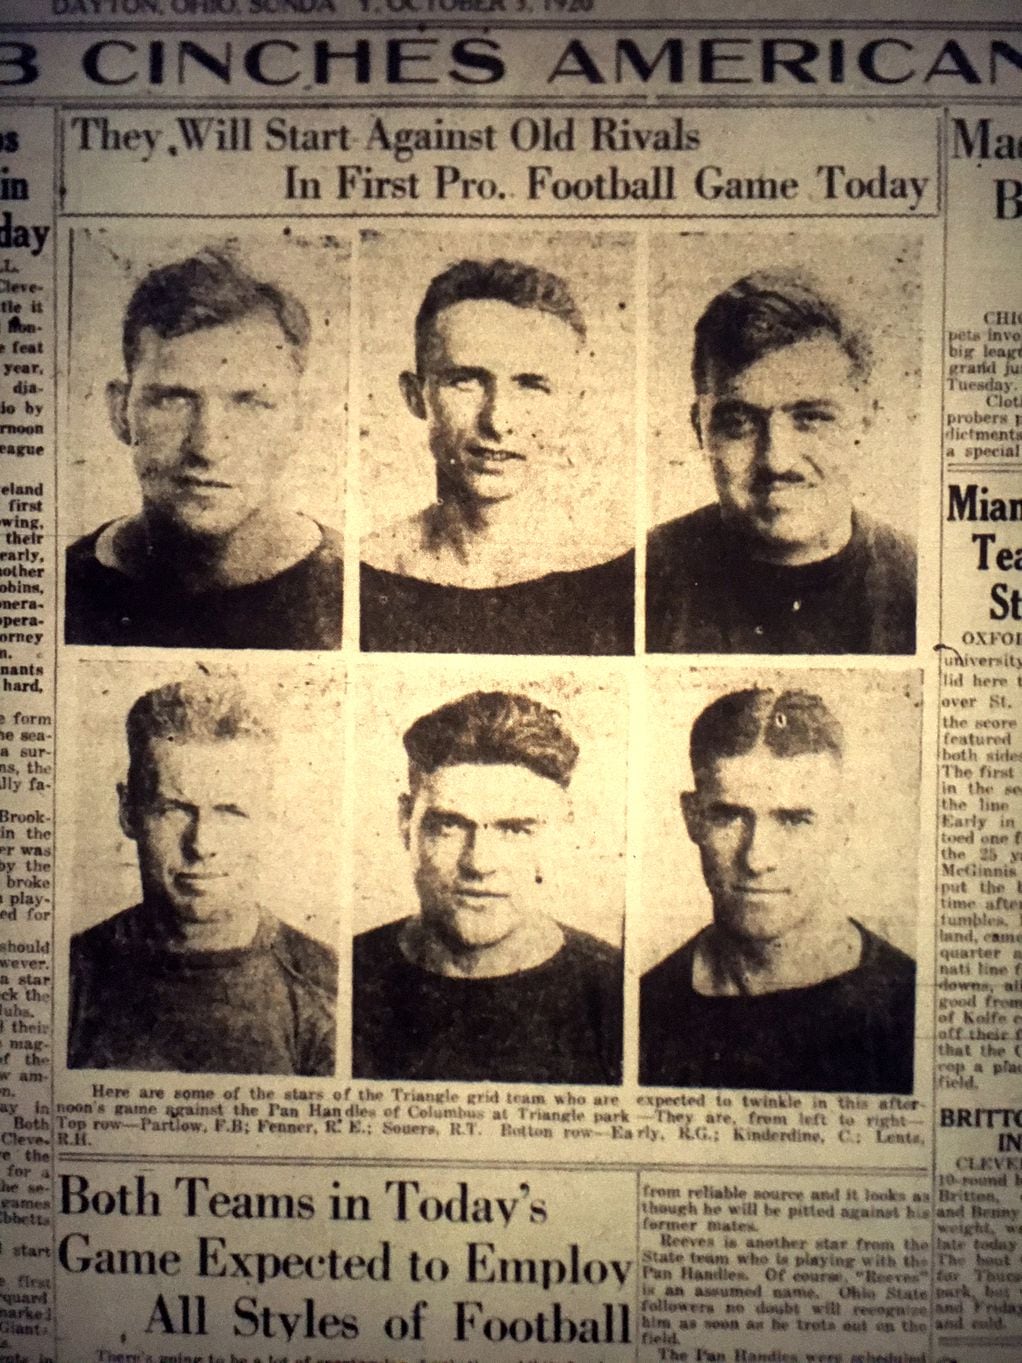 NFL's first game played in Dayton, Ohio